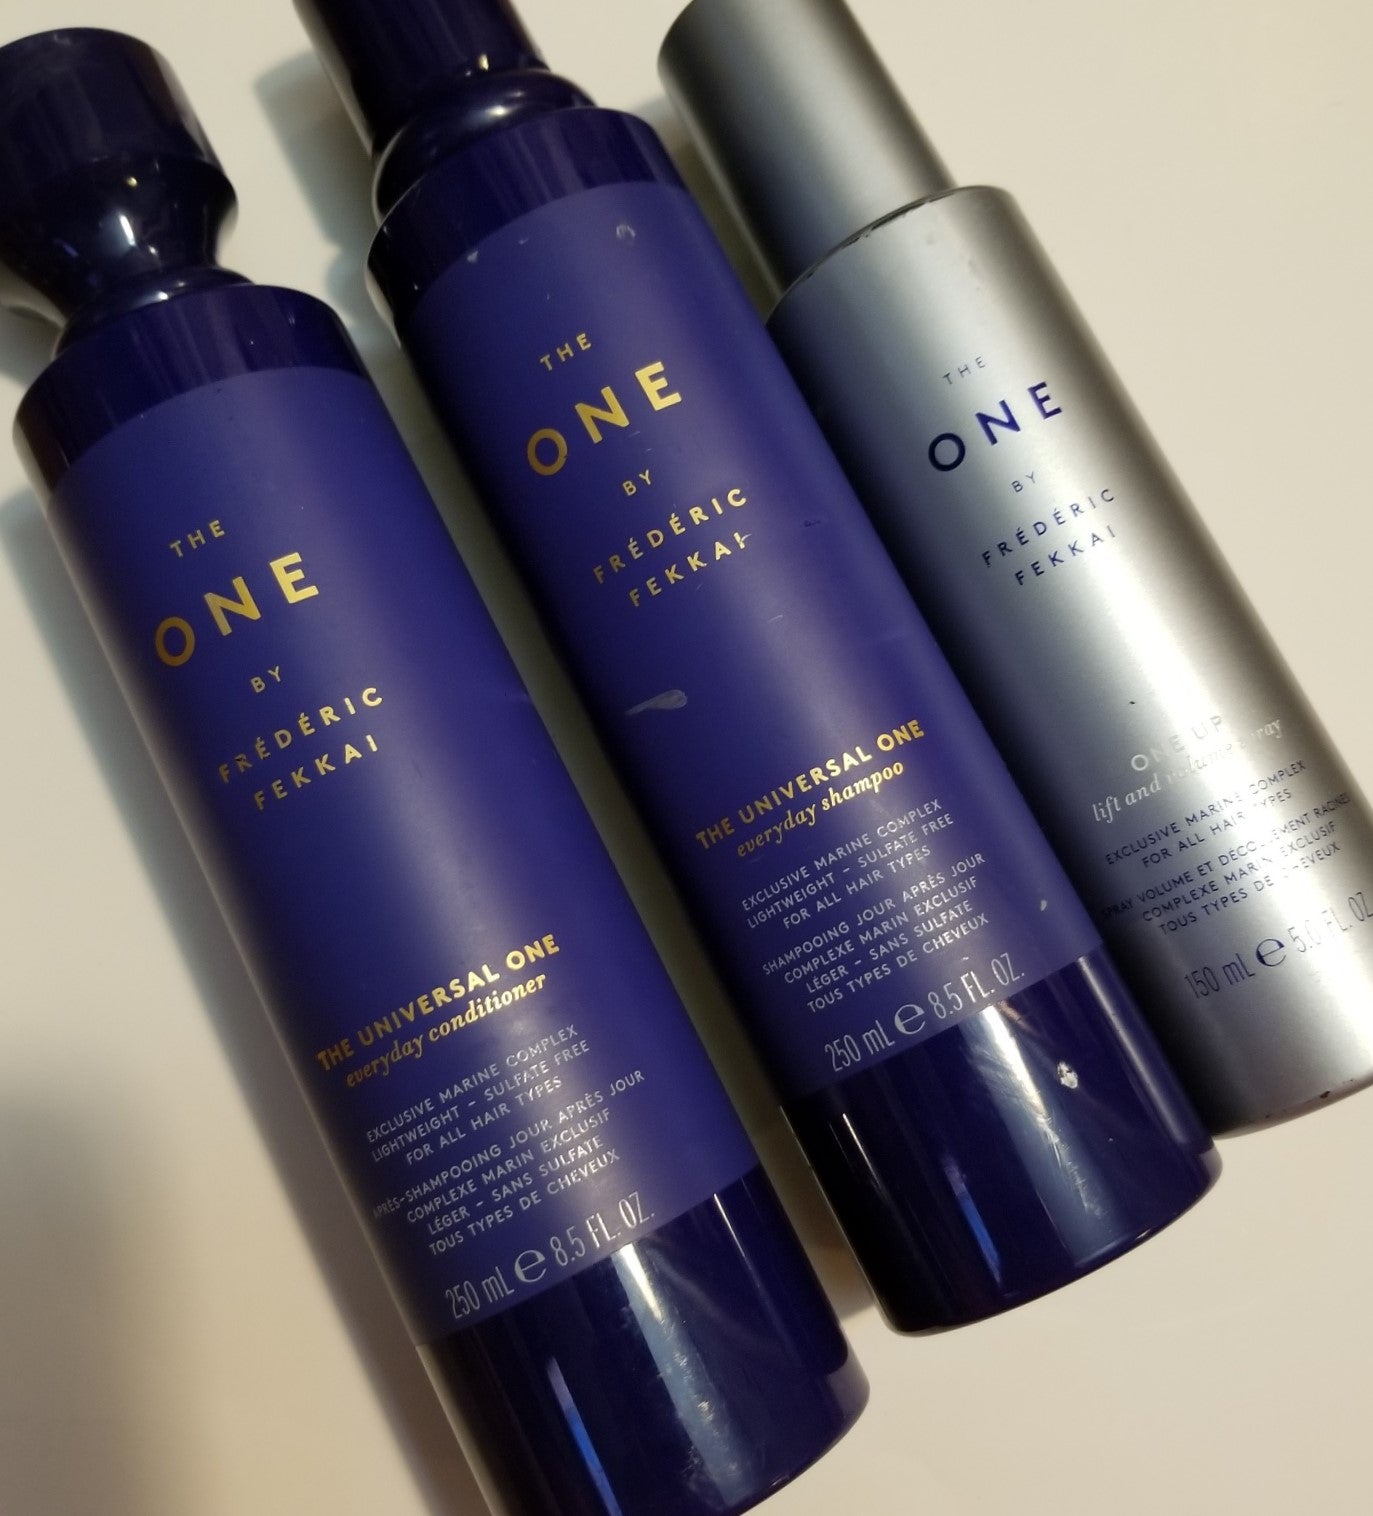 Review, Photos, Hairstyle, Haircare Trend 2018, 2019, 2020: Frederic Fekkai, The Universal One, Everyday Shampoo, Conditioner, One Up Lift and Volume Spray